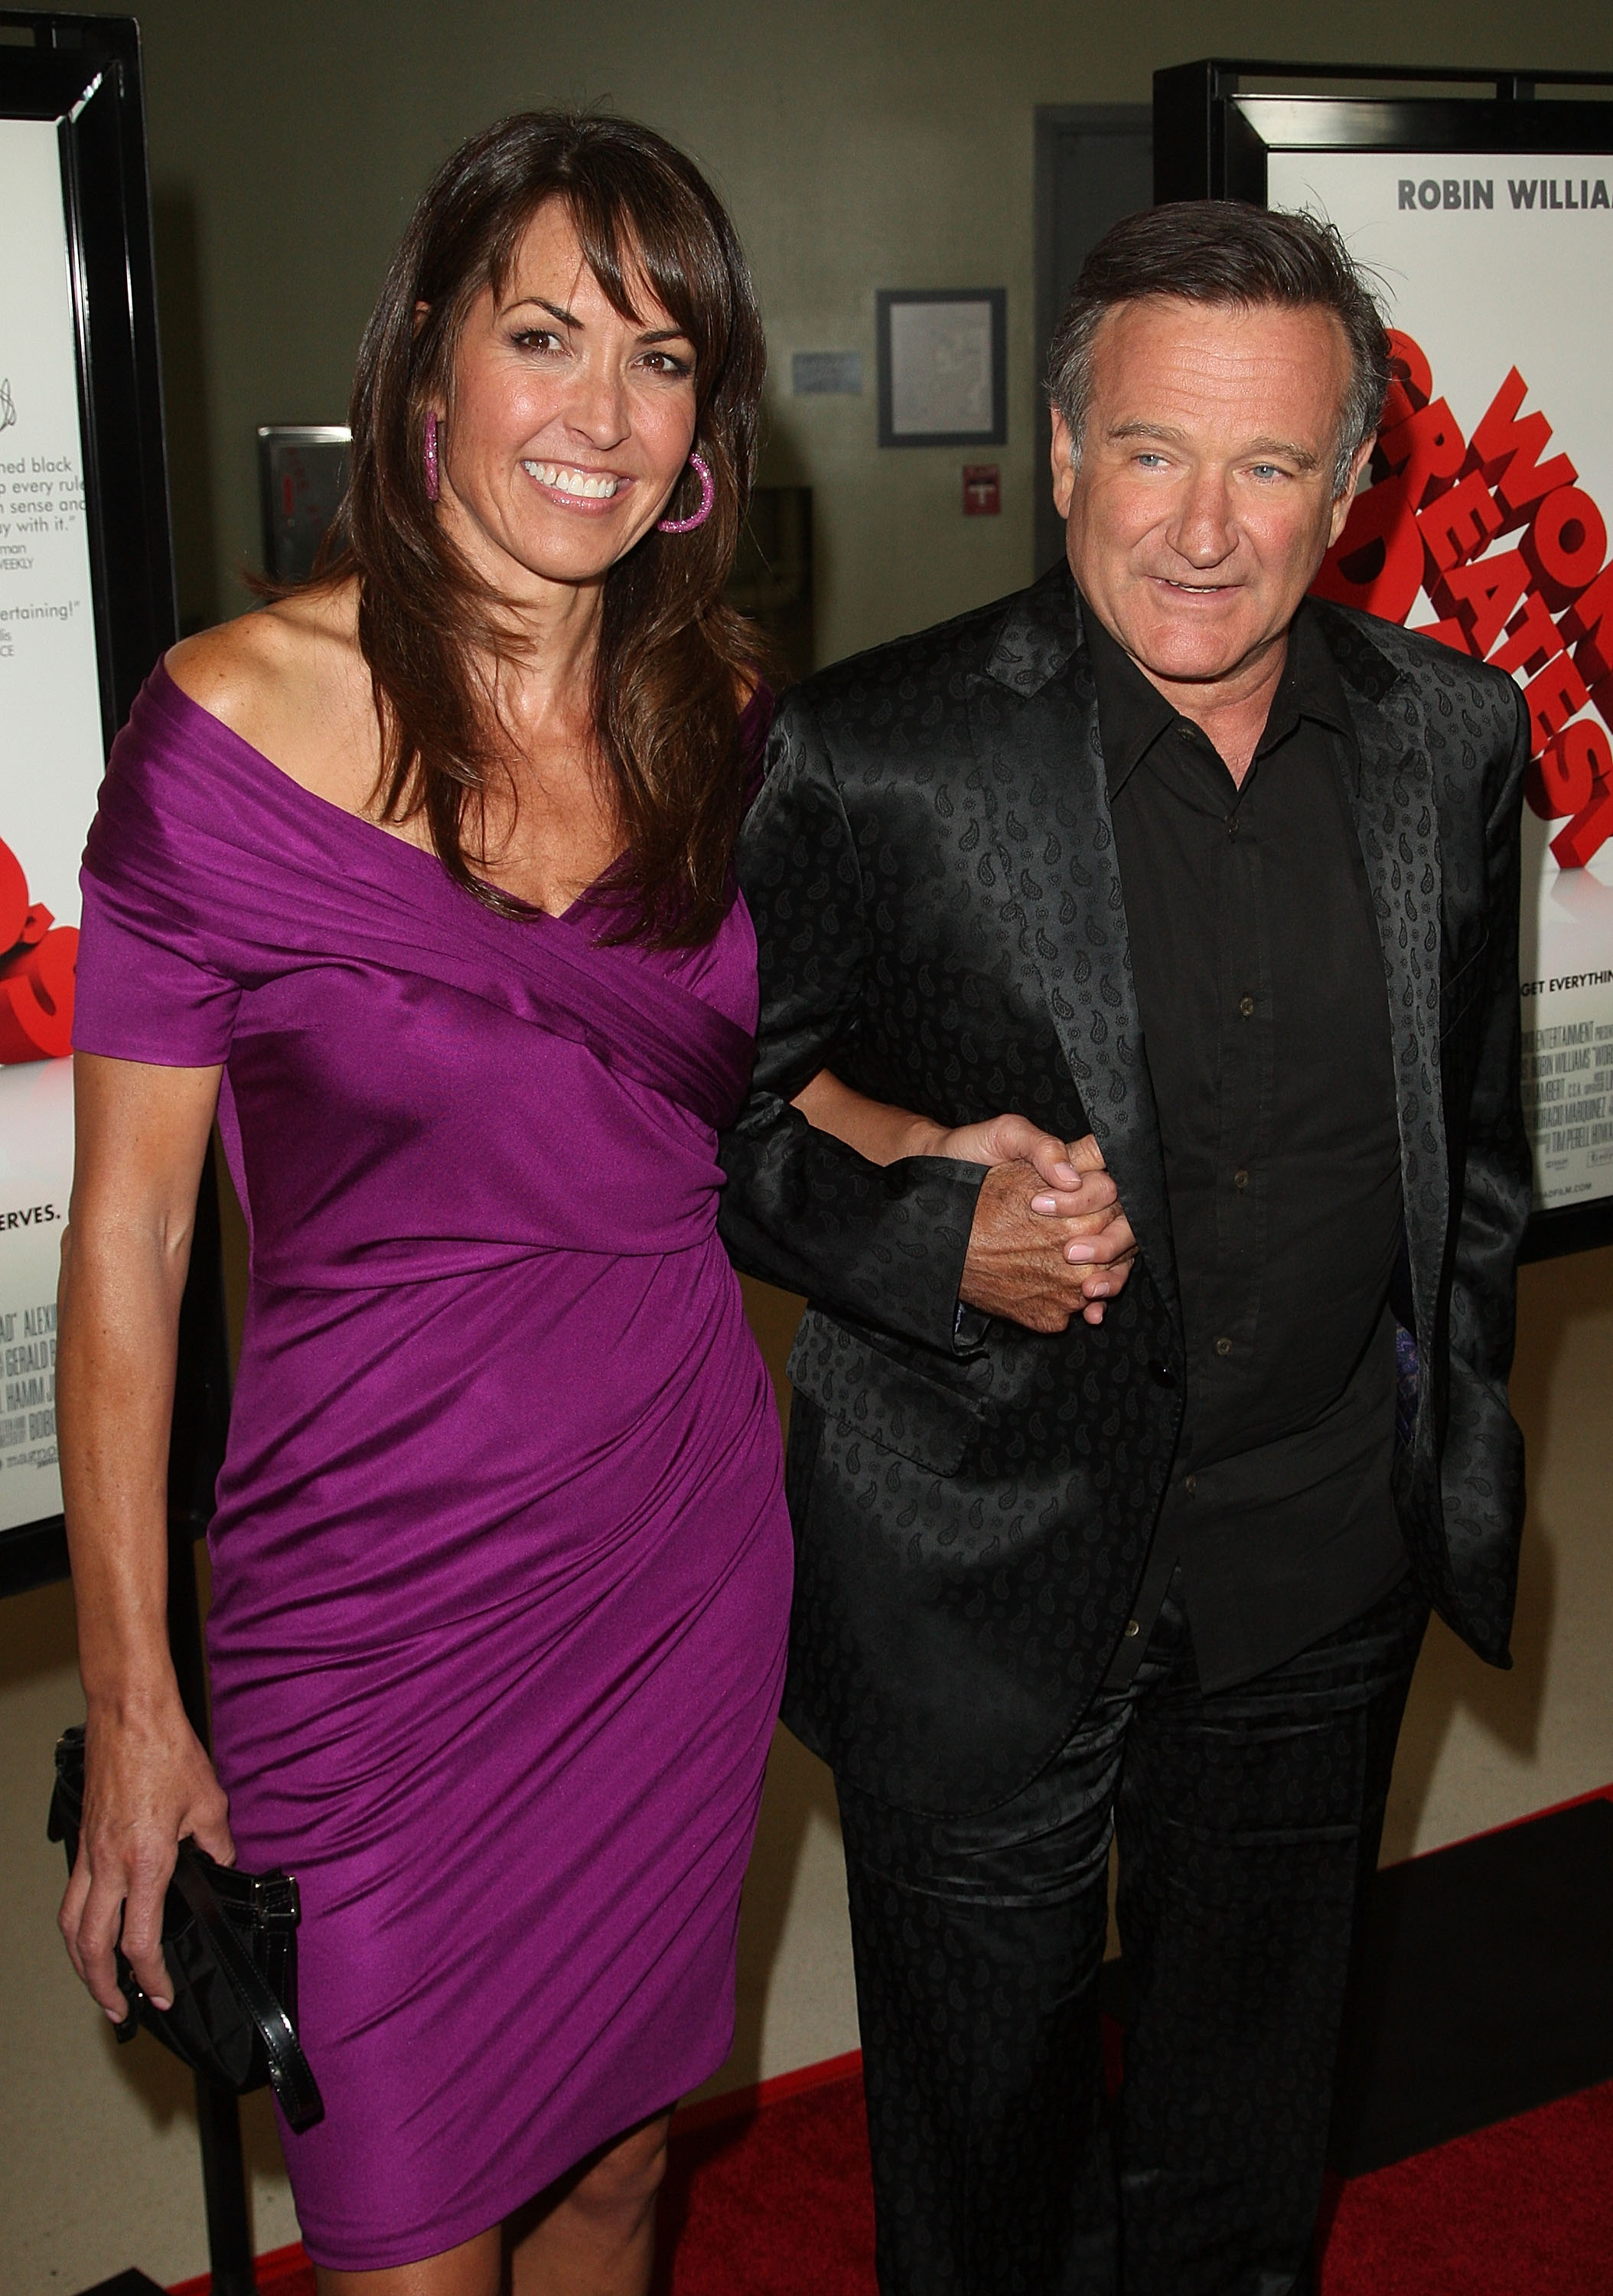 Robin Williams and his wife Susan Schneider in Los Angeles in 2009 | Source: Getty Images